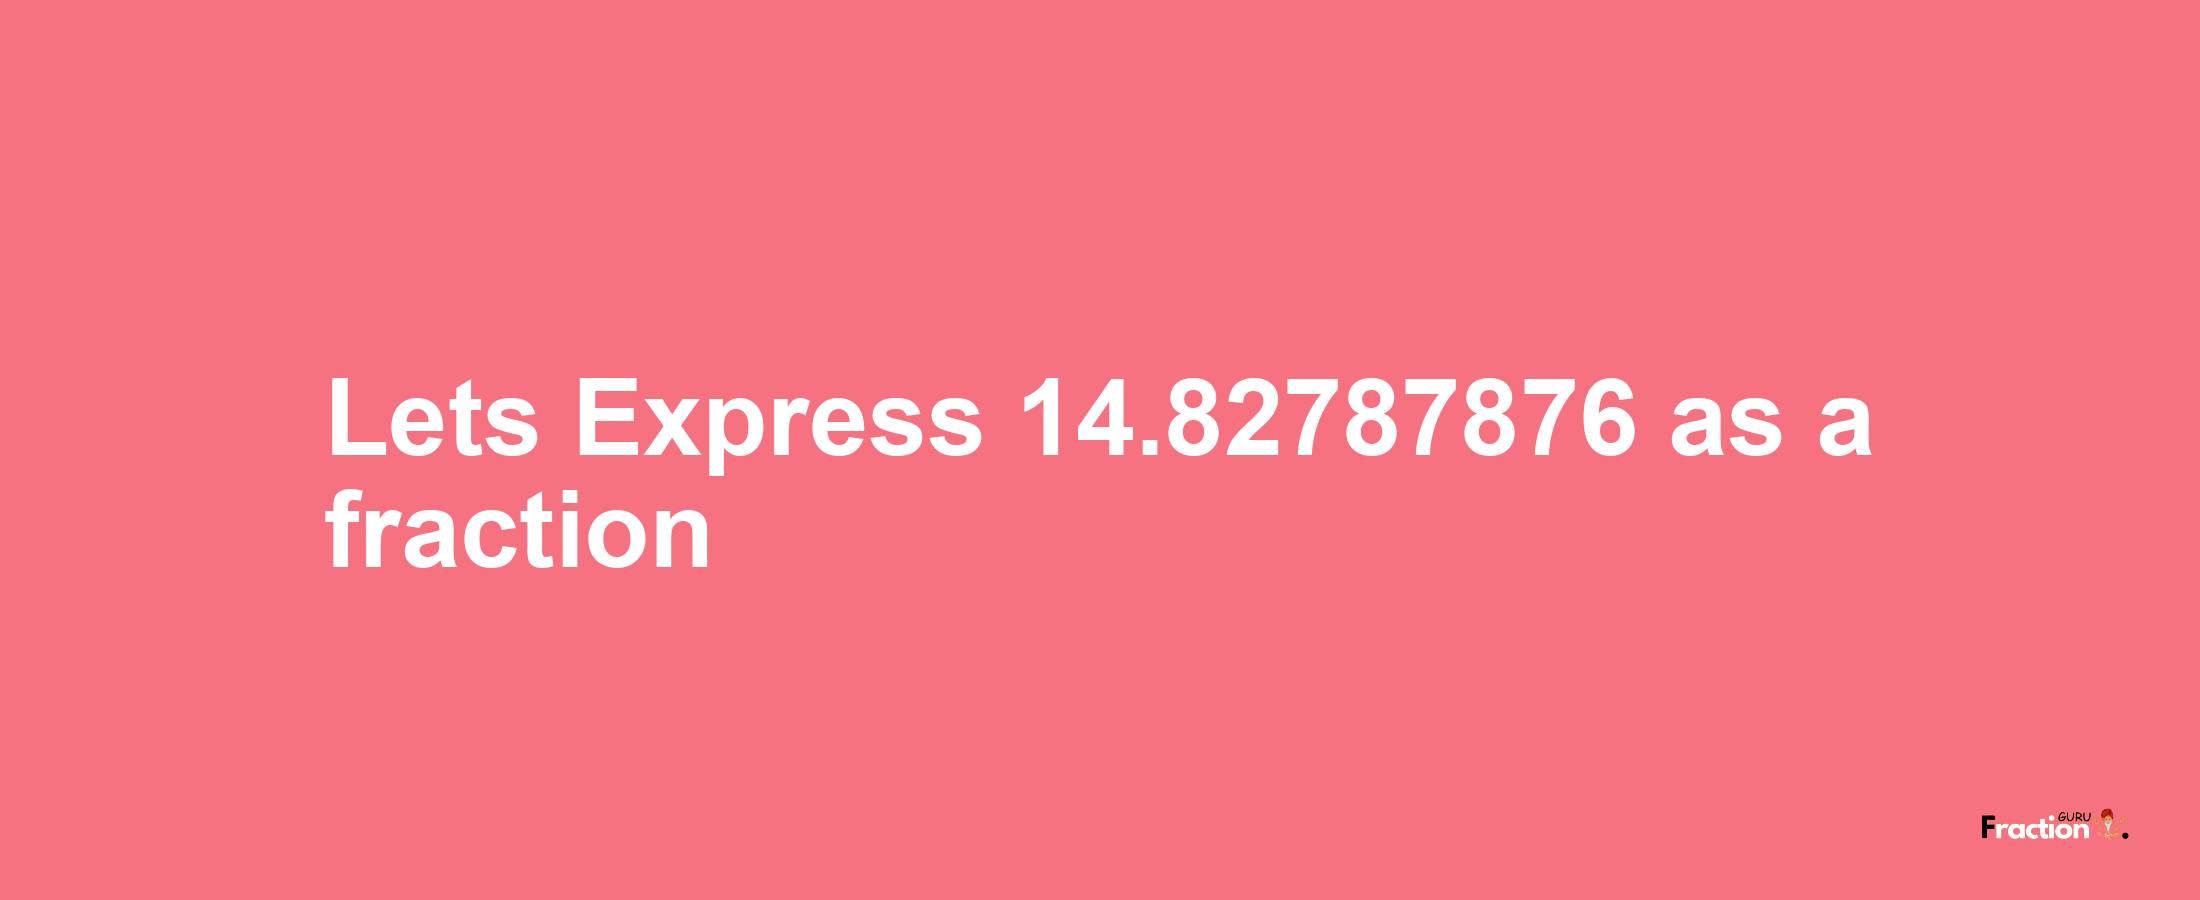 Lets Express 14.82787876 as afraction